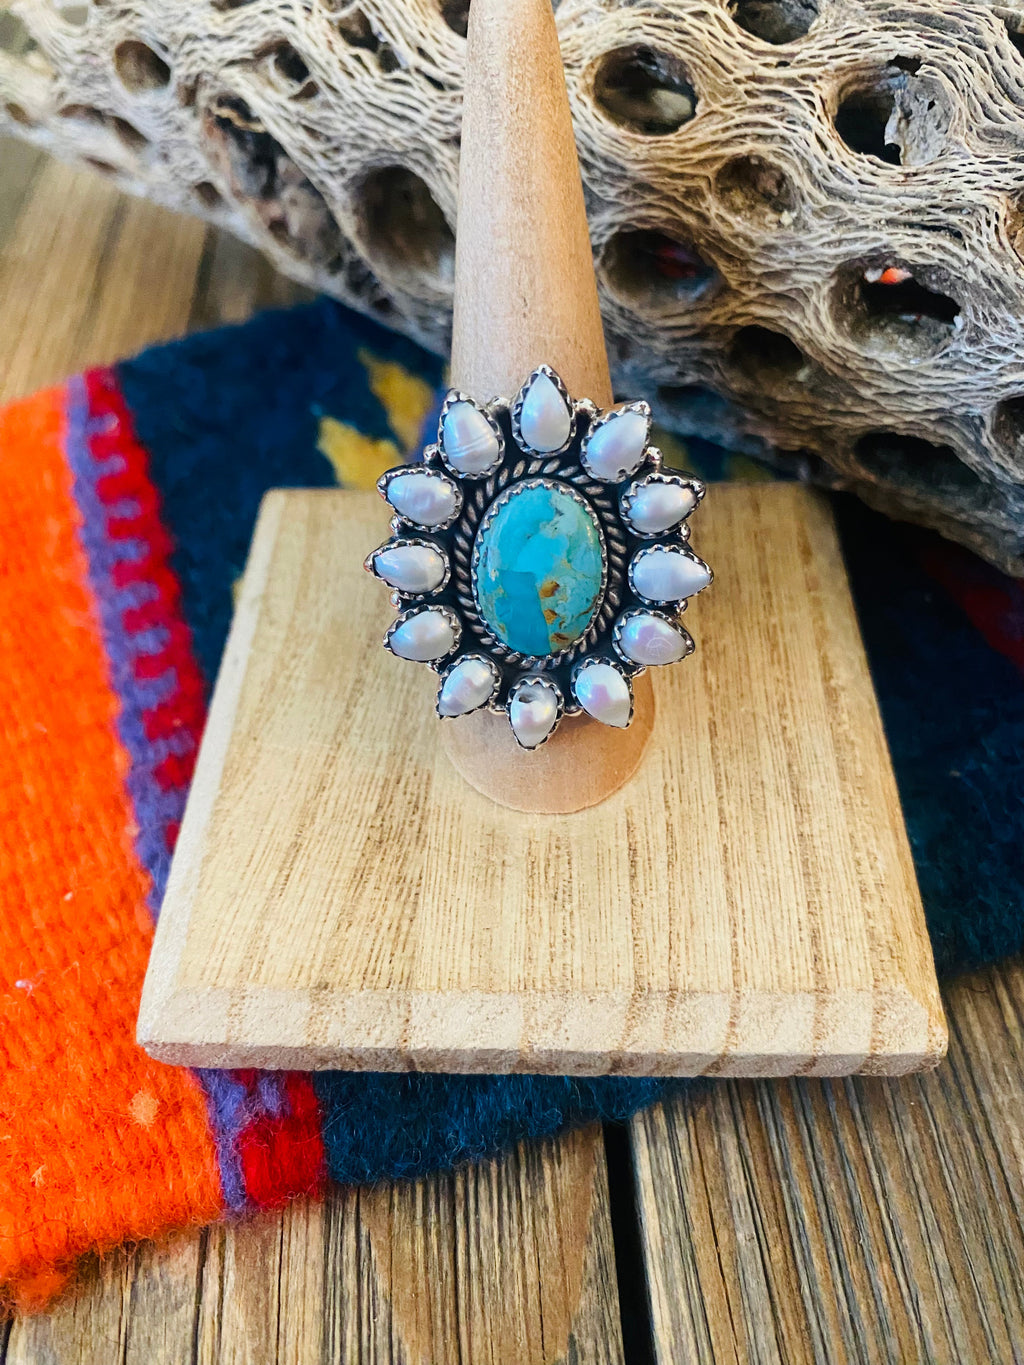 Handmade Sterling Silver, Turquoise & Pearl Adjustable Ring